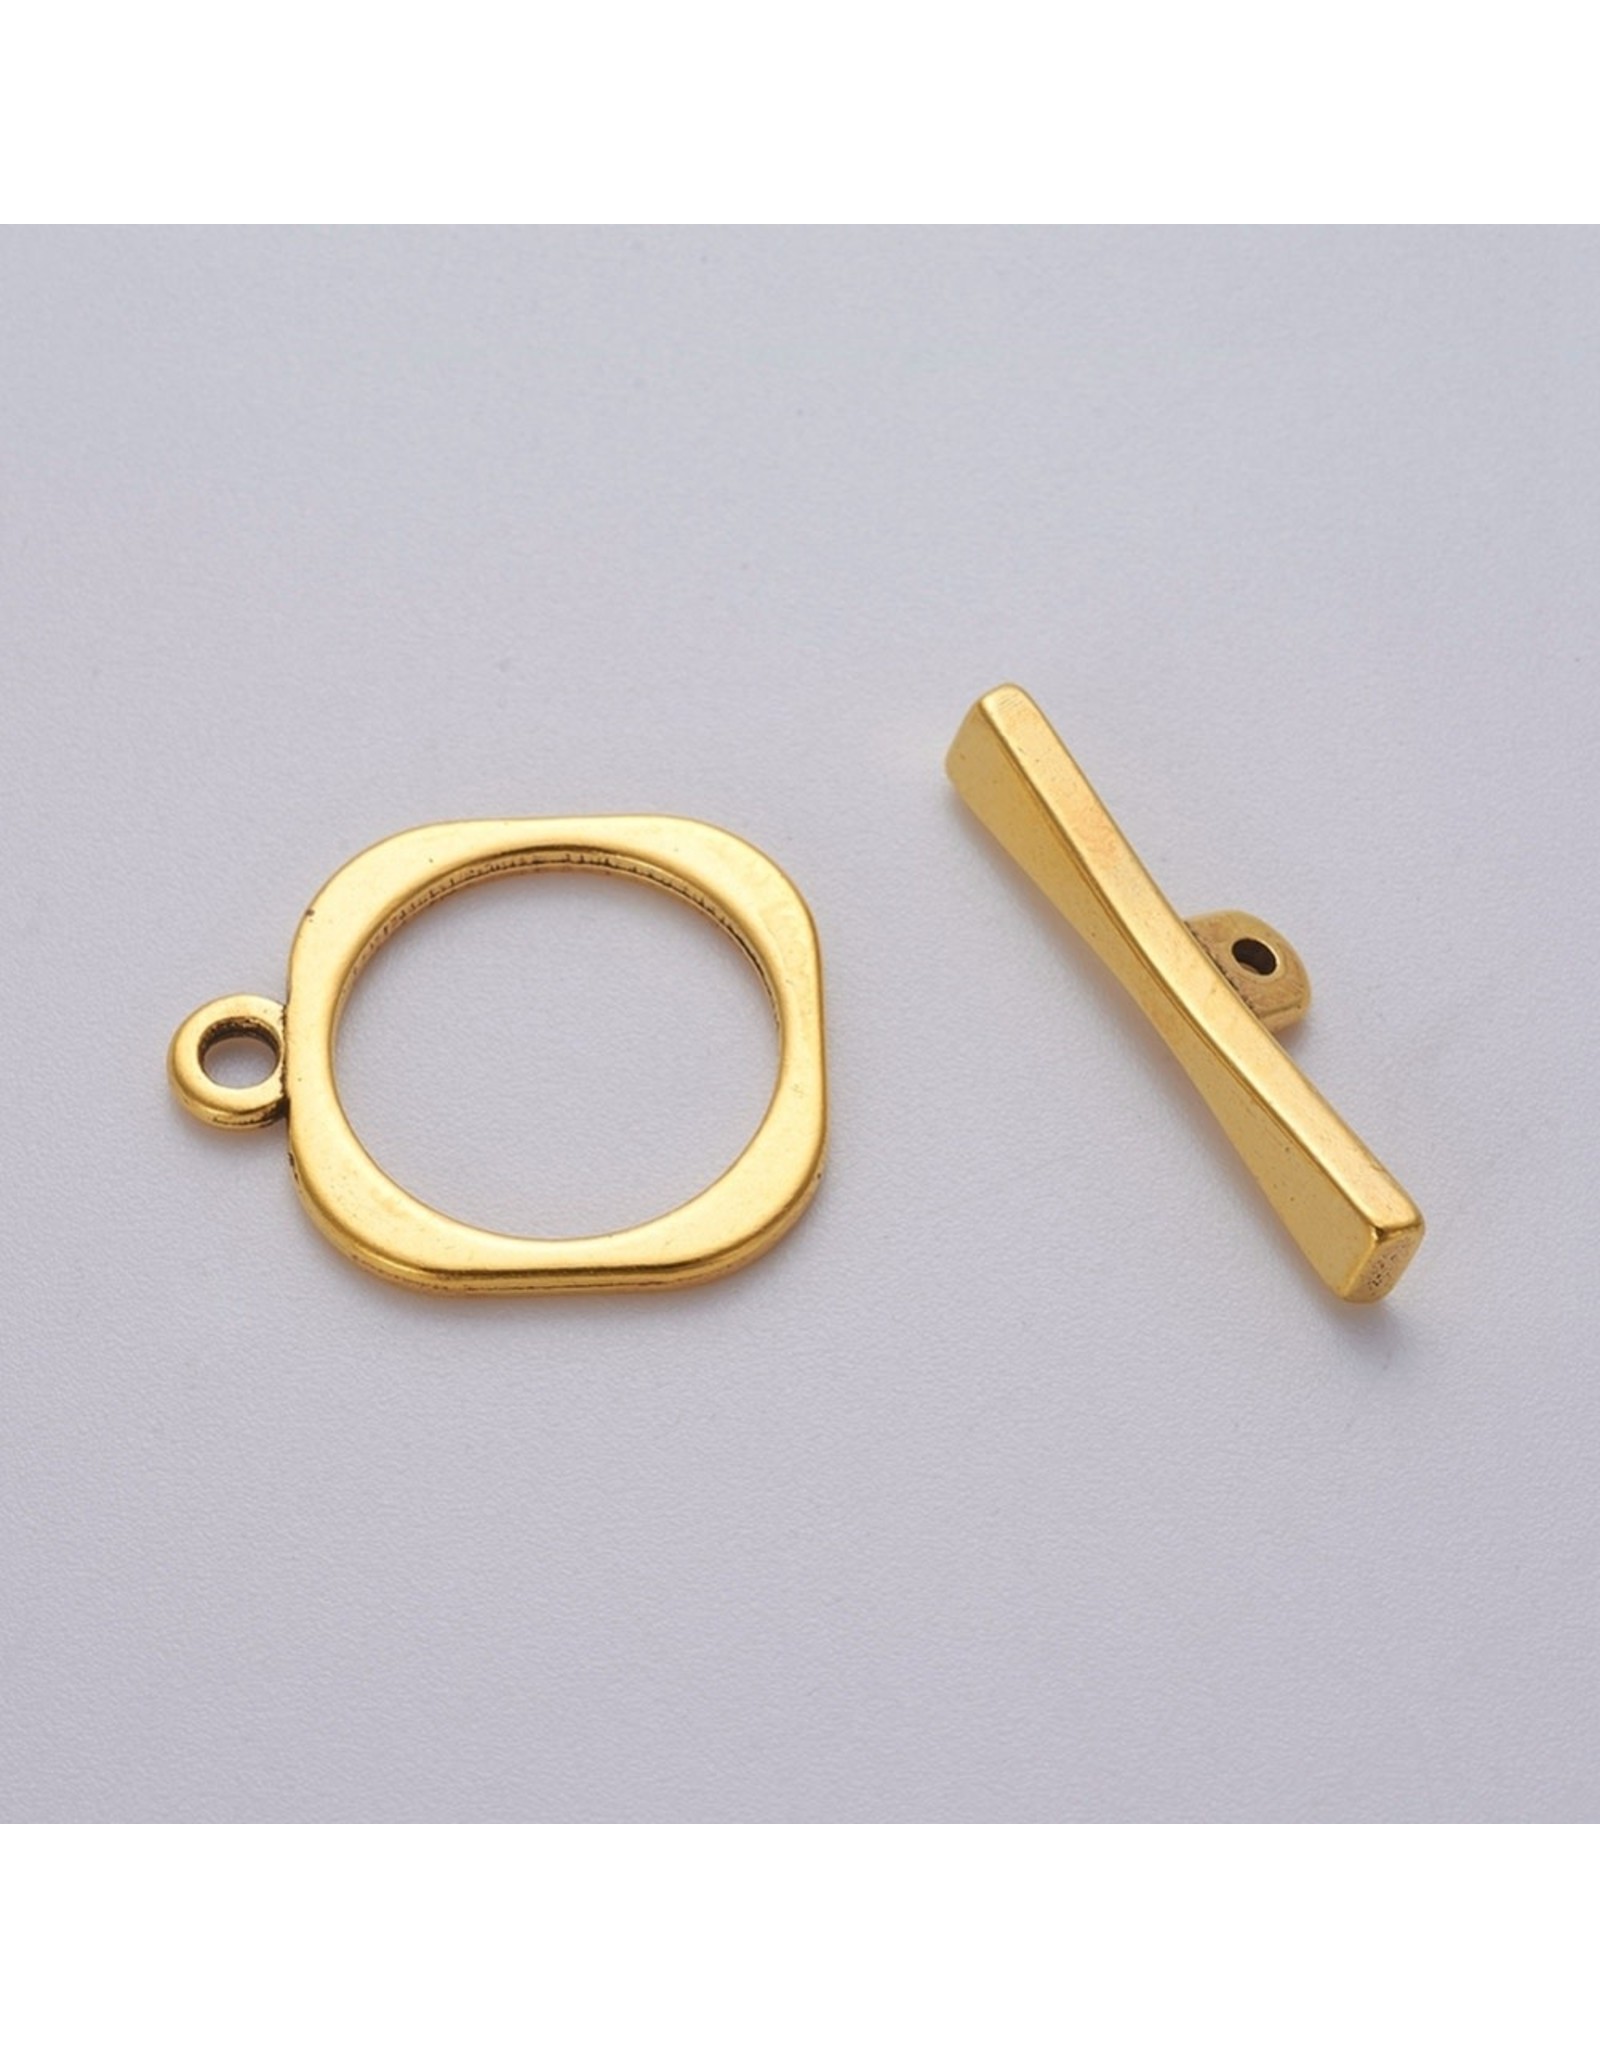 Toggle Clasp Square 18mm Gold   x5  NF